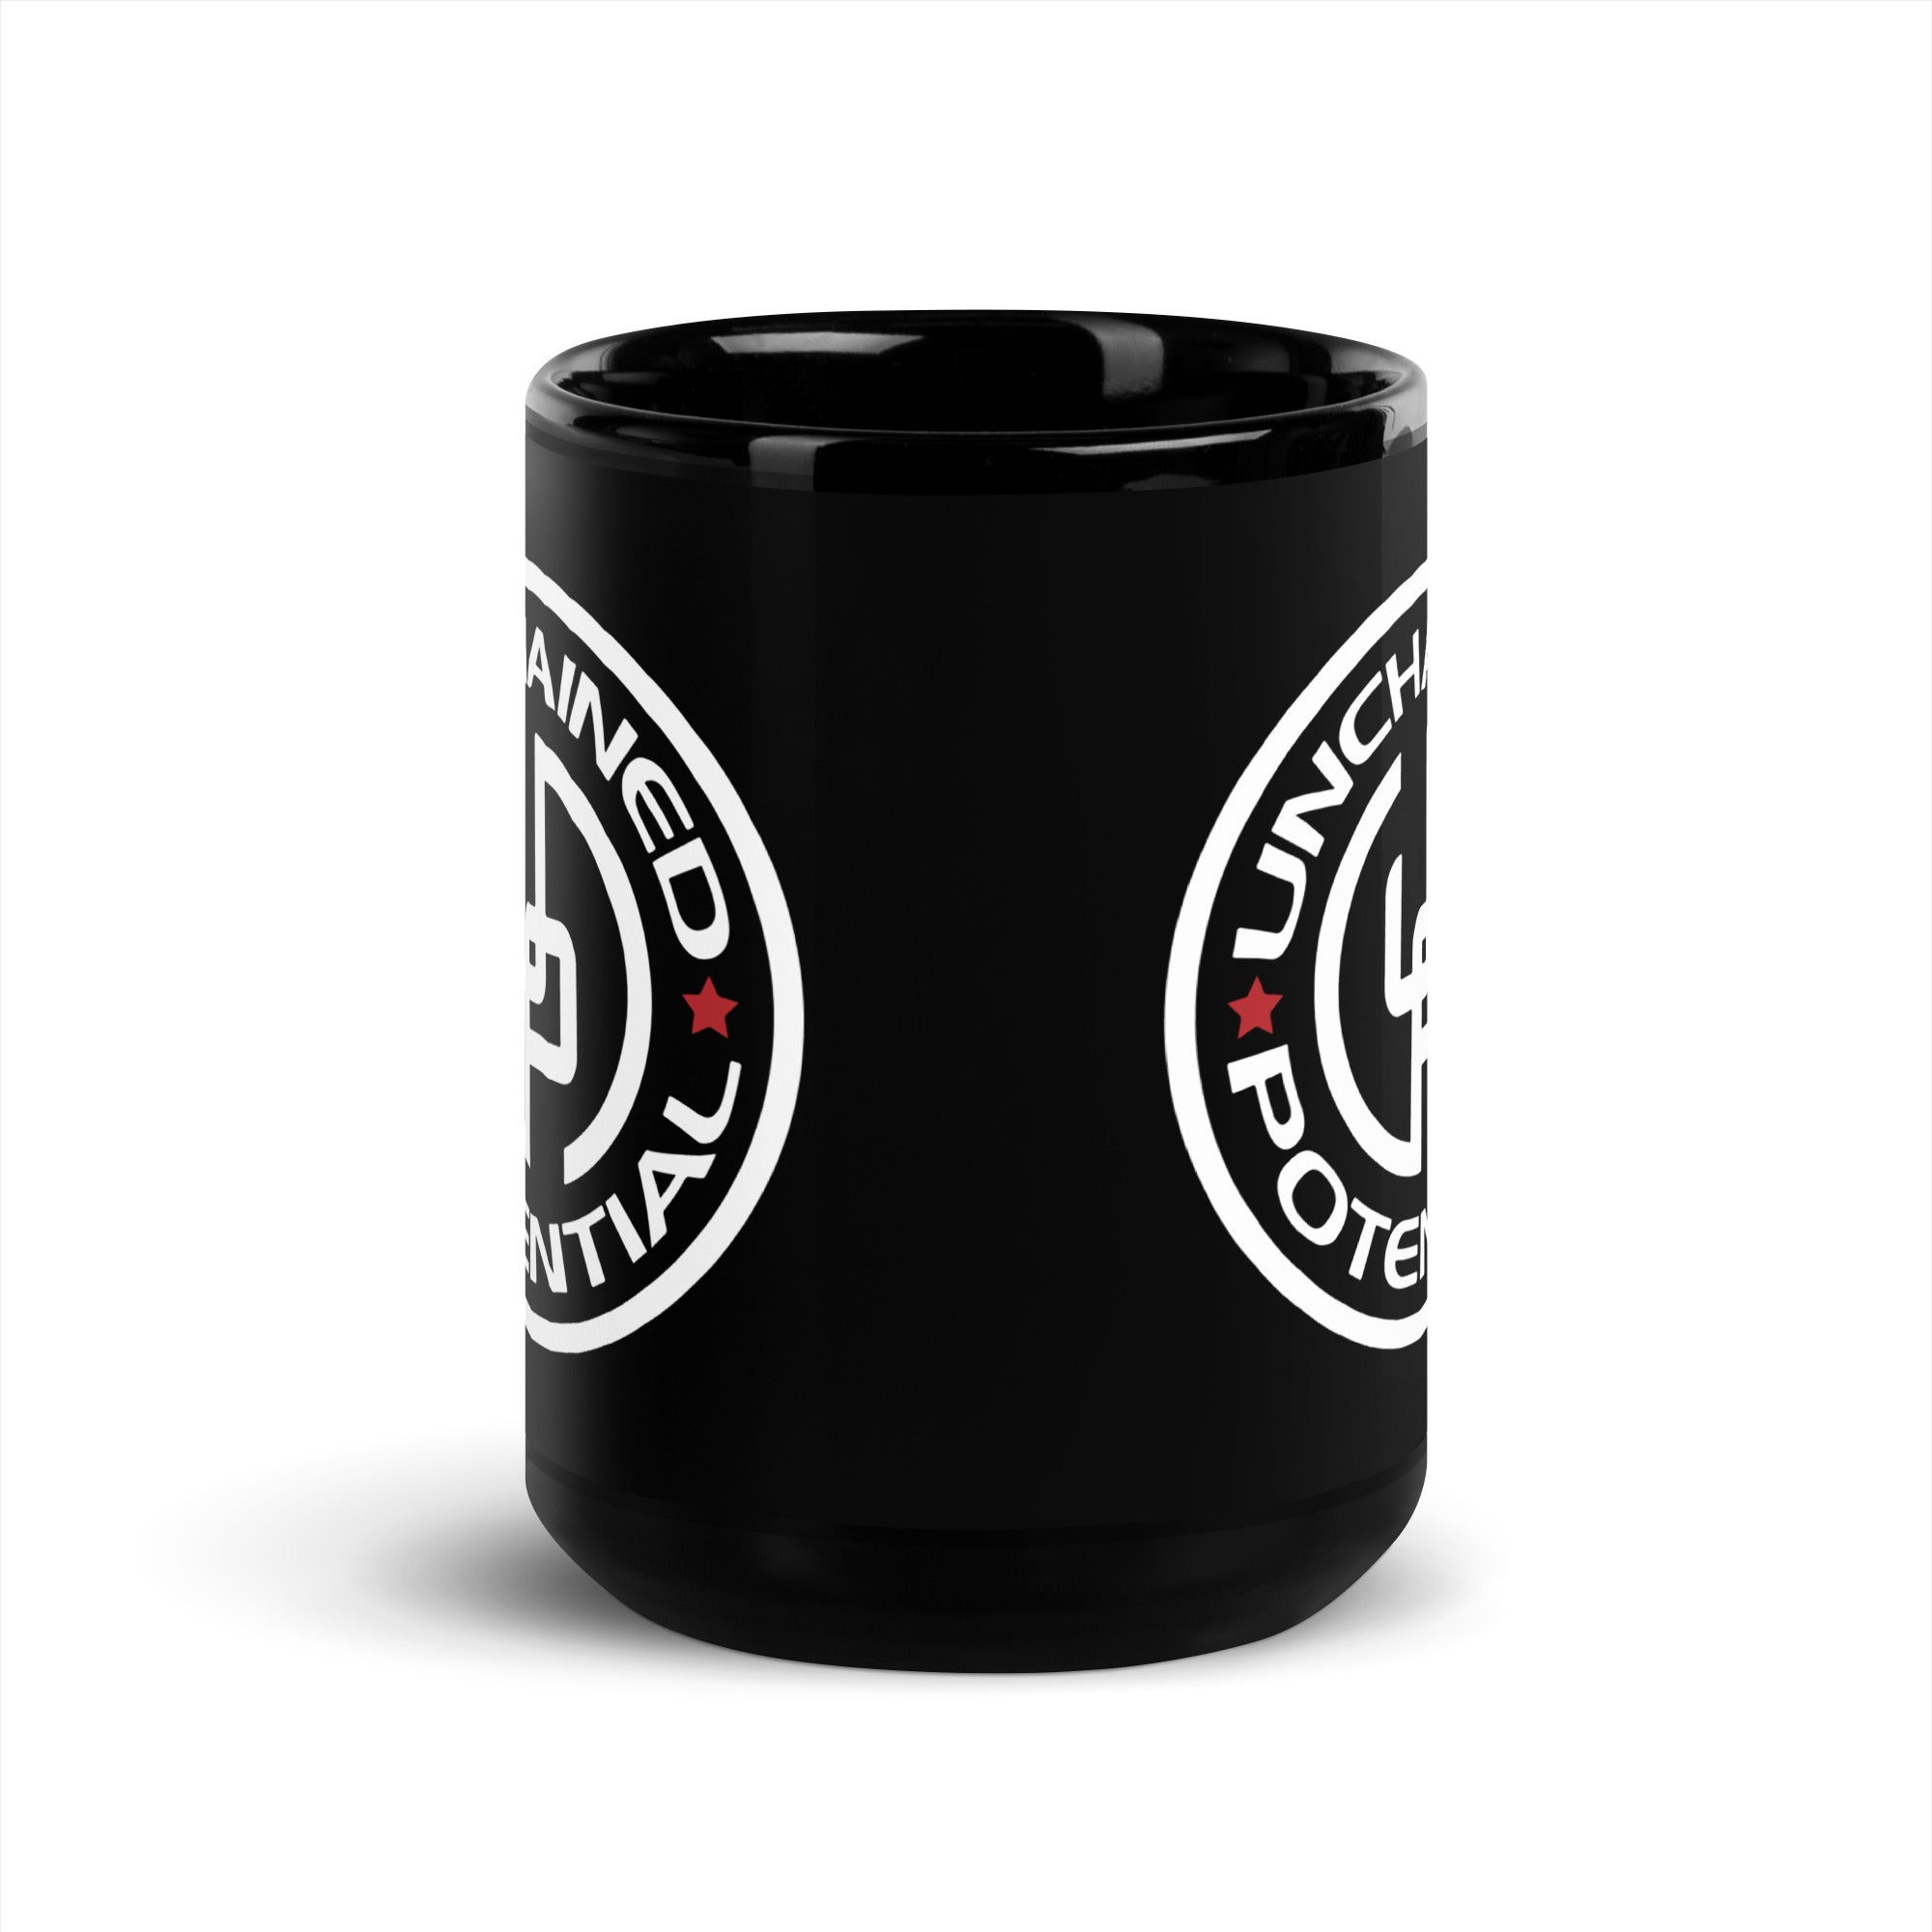 Unchained Potential Black Glossy Mug v2